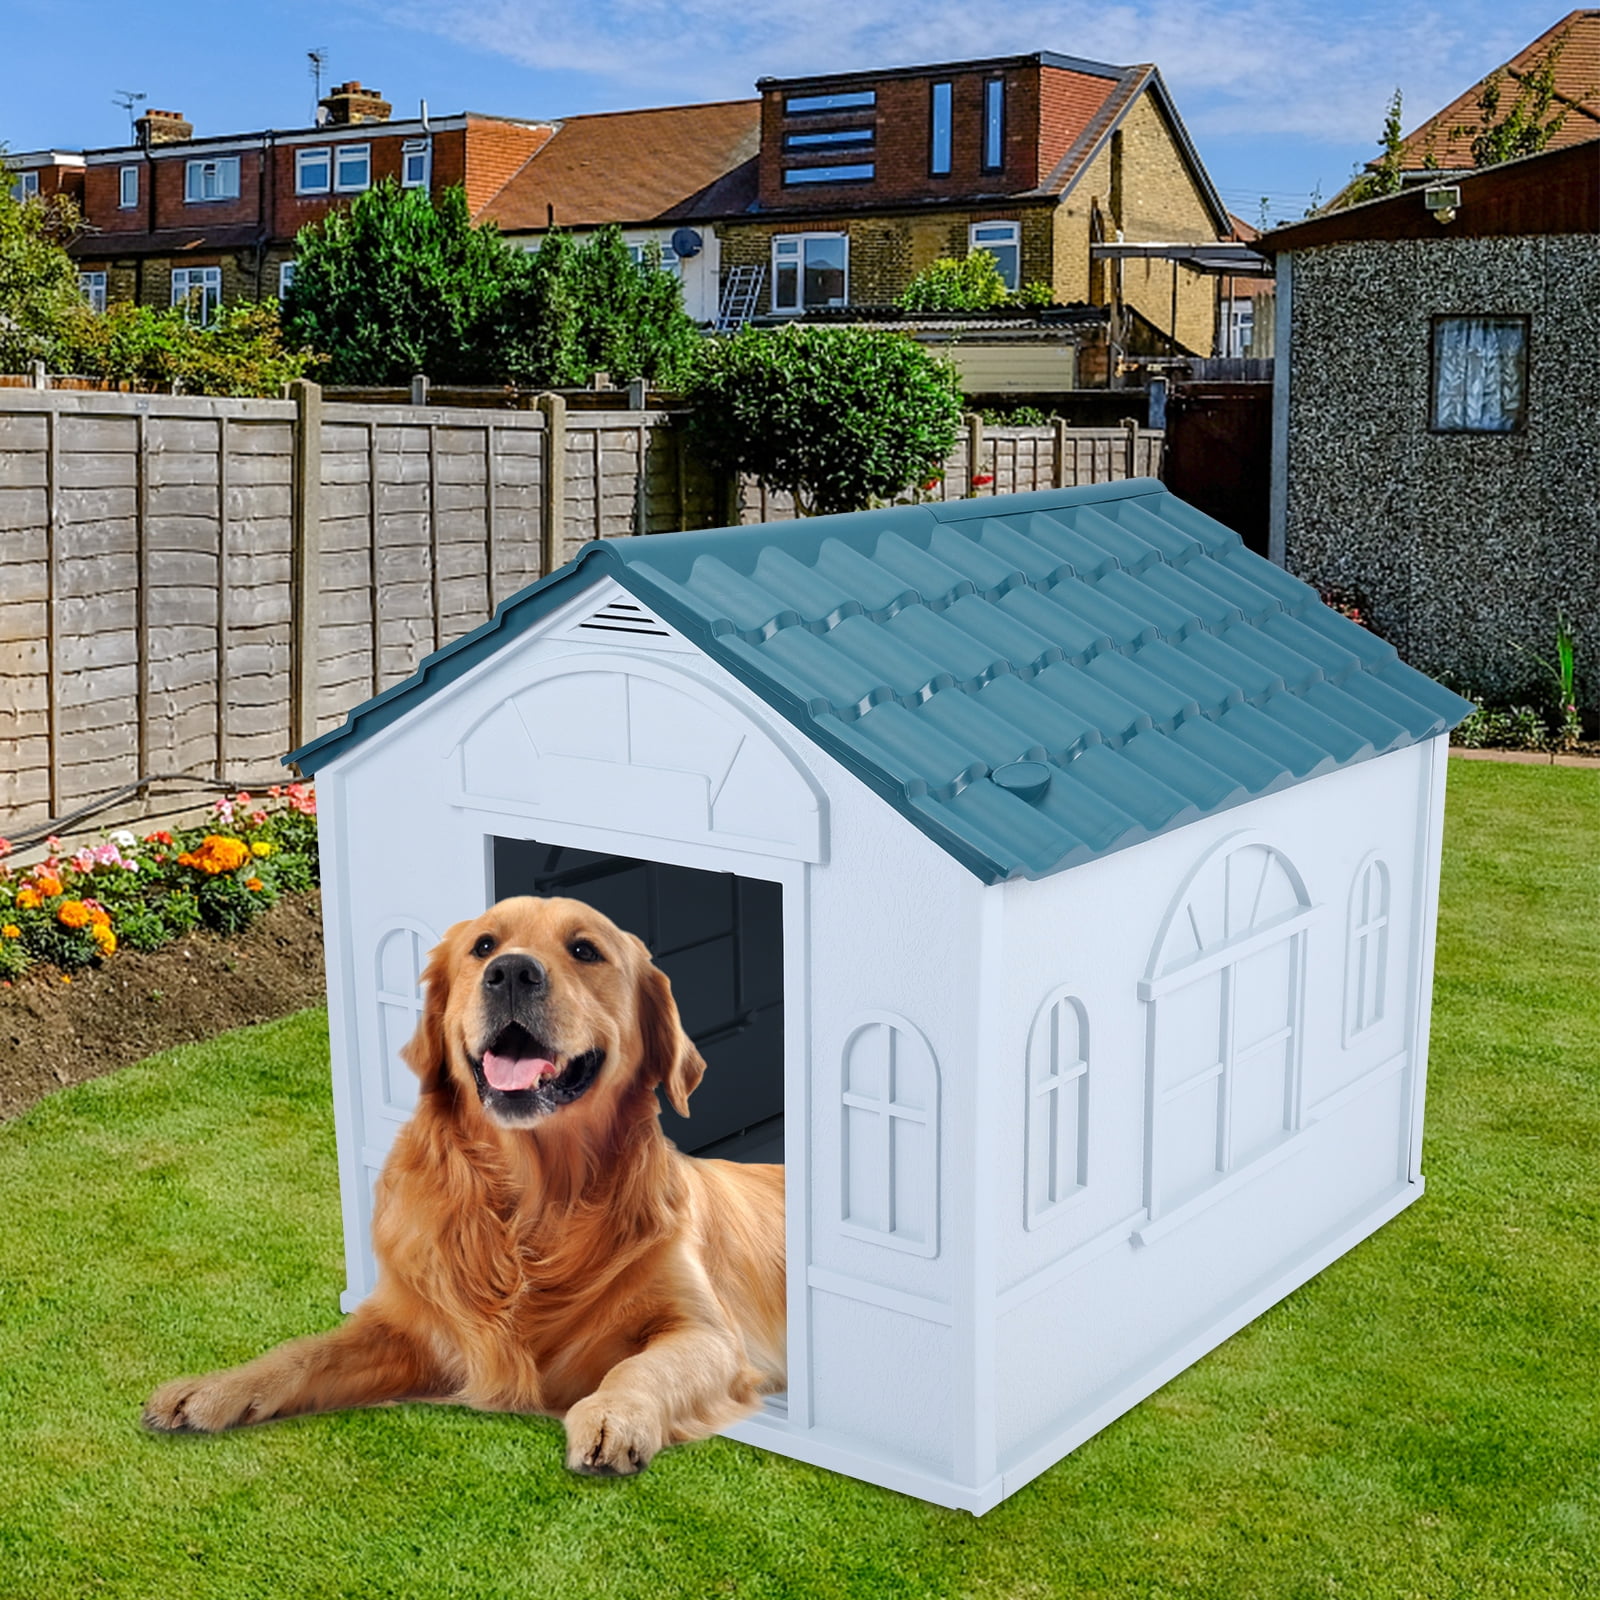 Pet House Waterproof Outdoor Indoor Cat Shelter for Small Dog Pets Living Room Pets Resist Severe Cold and Keep Warm All Weather Dog House Puppy Cat Shelter Pet Houses for Outside 